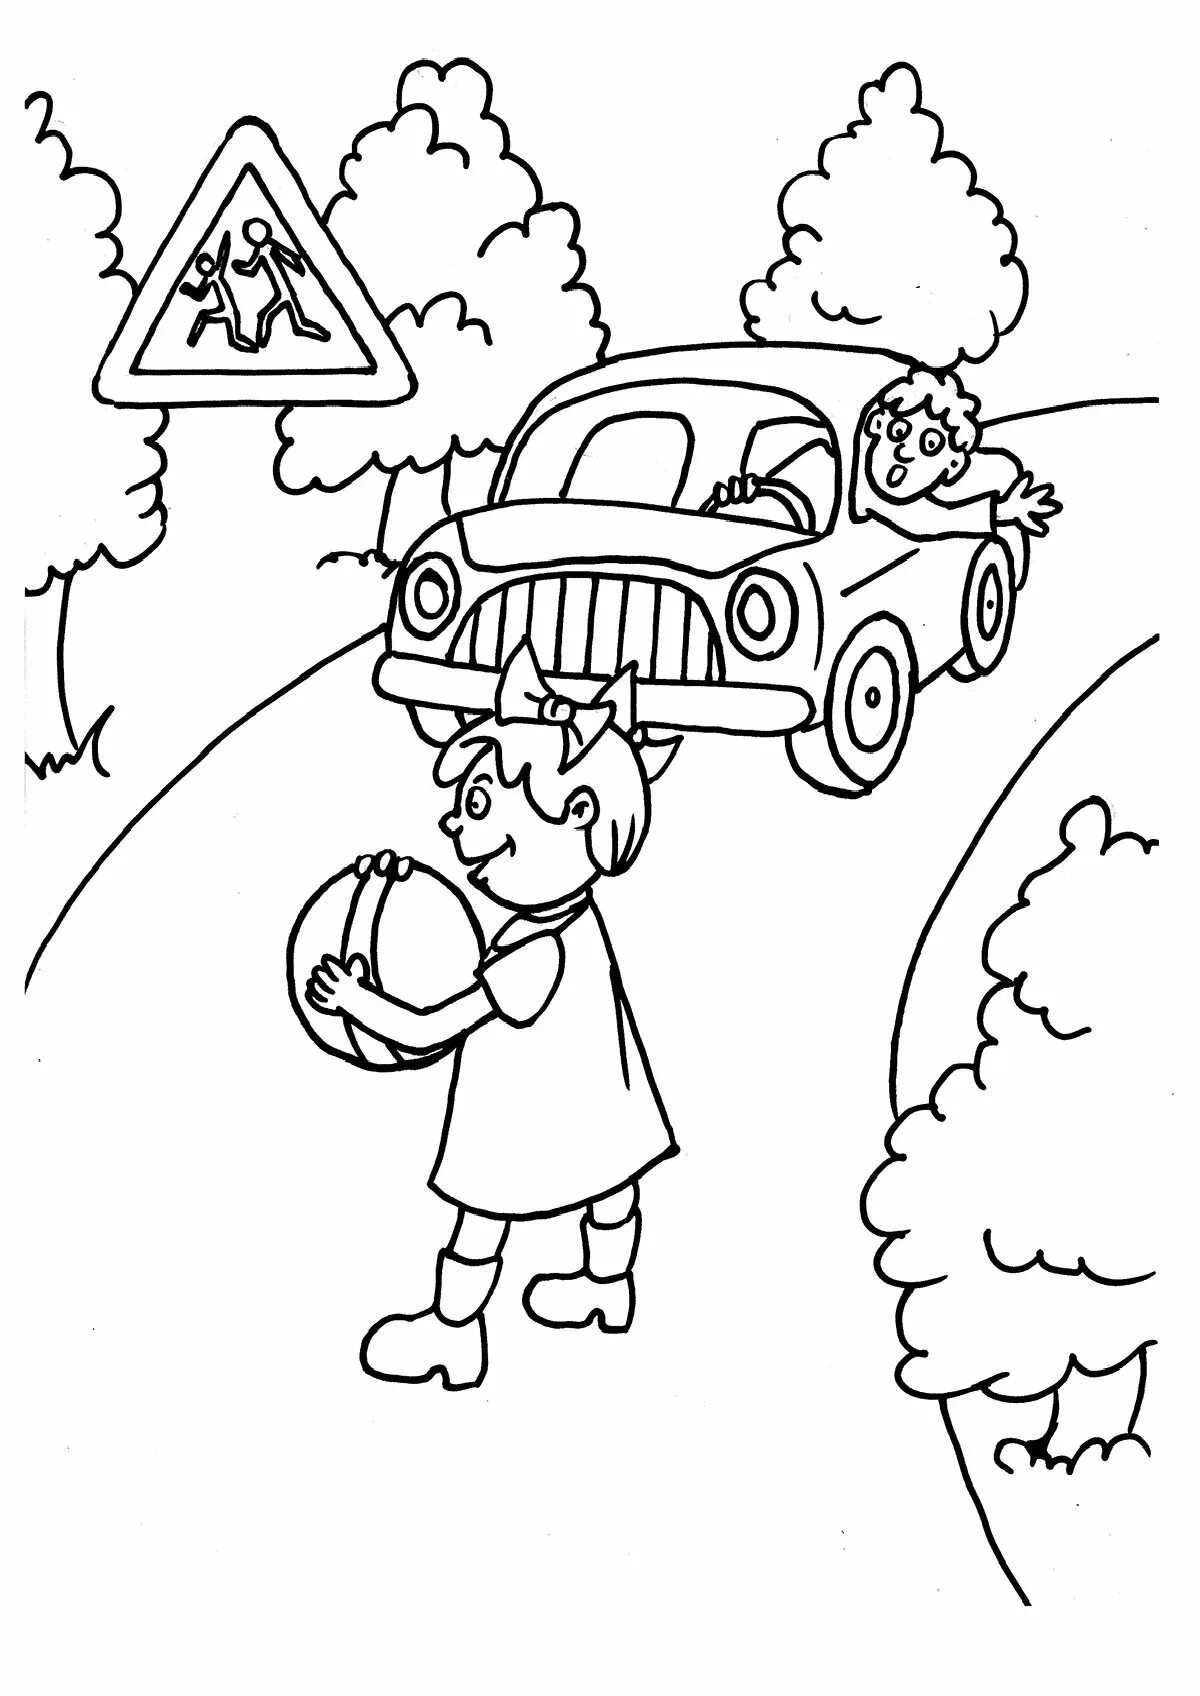 Exciting winter road coloring book for kids